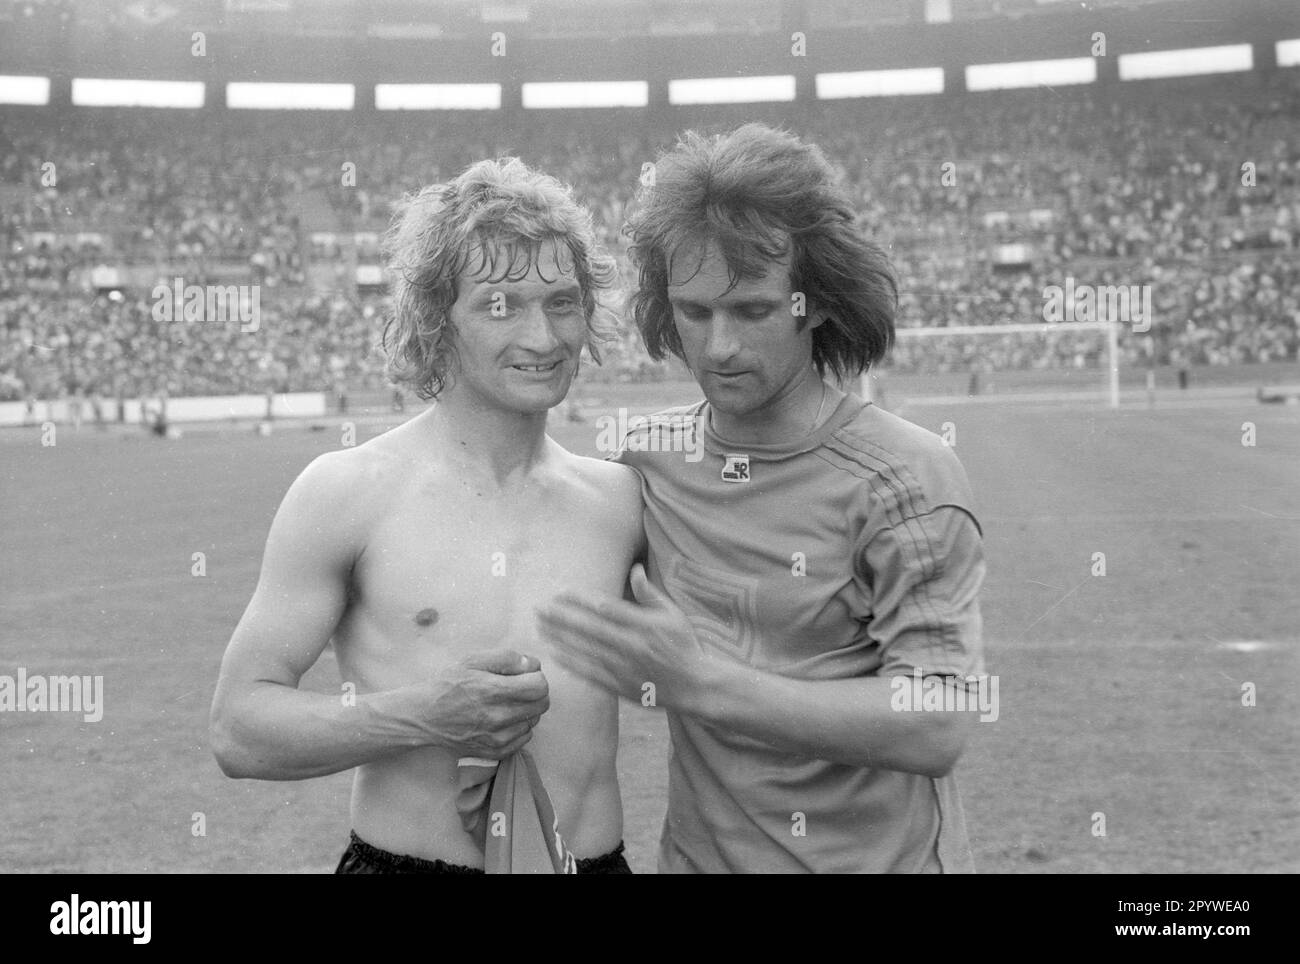 Soccer World Cup 1974 / Final round Group B / FRG - Yugoslavia 2:0 / 26.06.1974 in Duesseldorf / Dieter Herzog (left) and Wolfgang Overath (both Deut.) after the game. [automated translation] Stock Photo